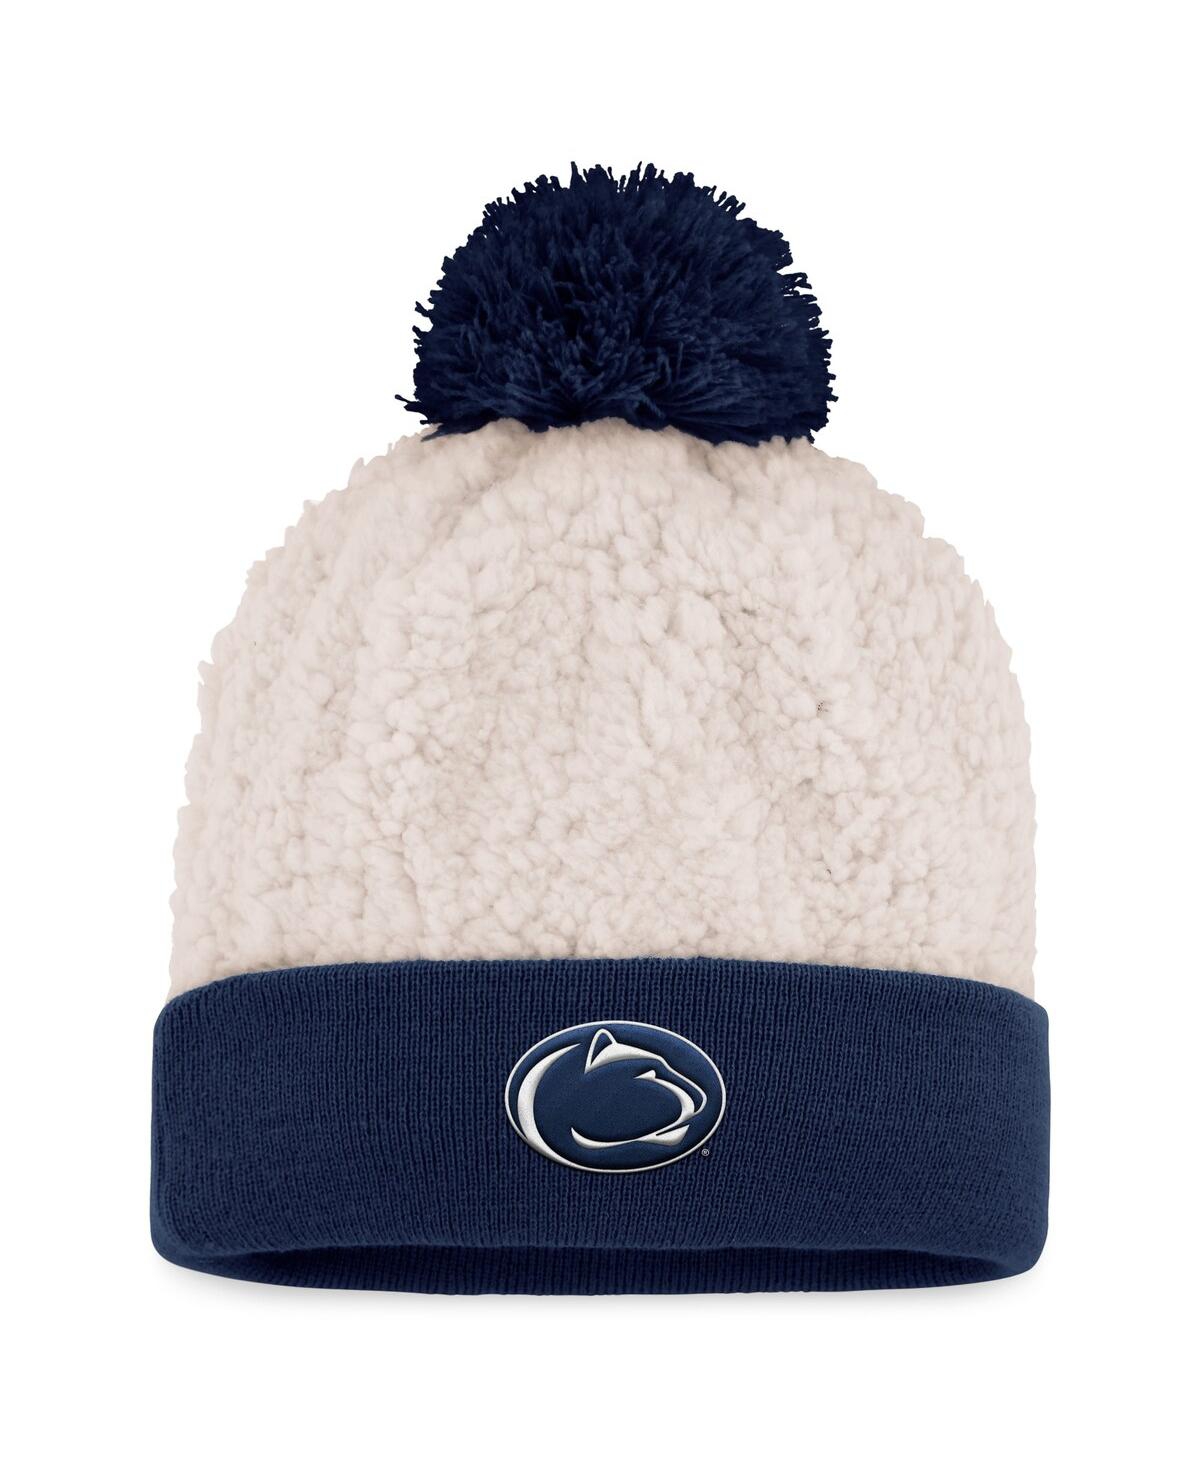 Women's Top of the World Cream Penn State Nittany Lions Grace Sherpa Cuffed Knit Hat with Pom - Cream